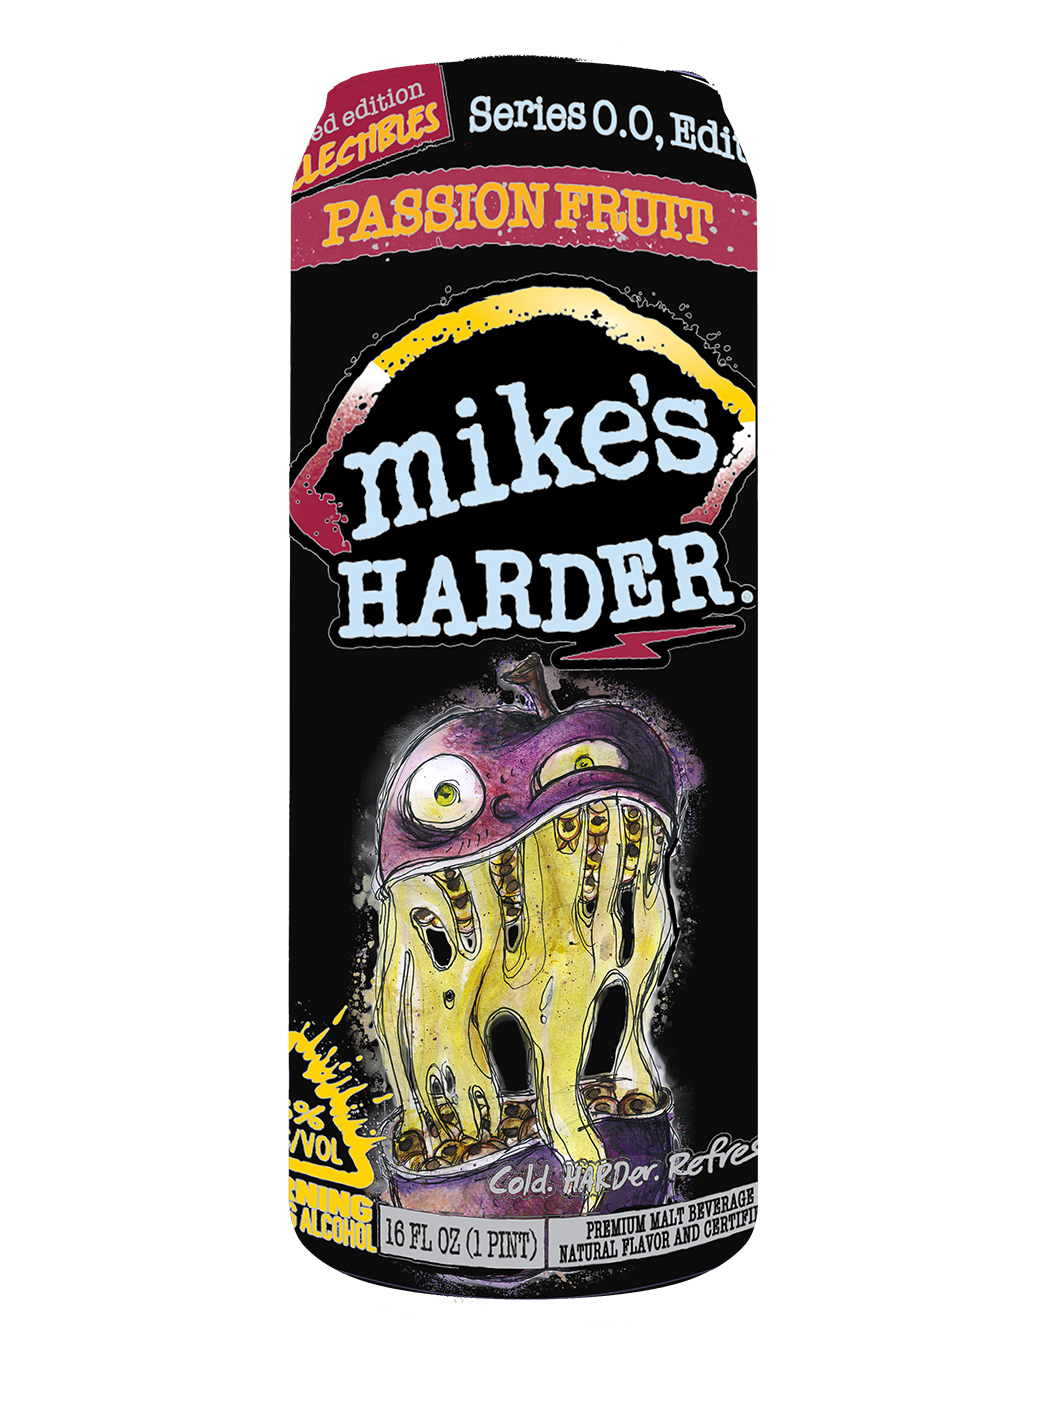 USD artist competes in Mike’s Hard Lemonade design contest